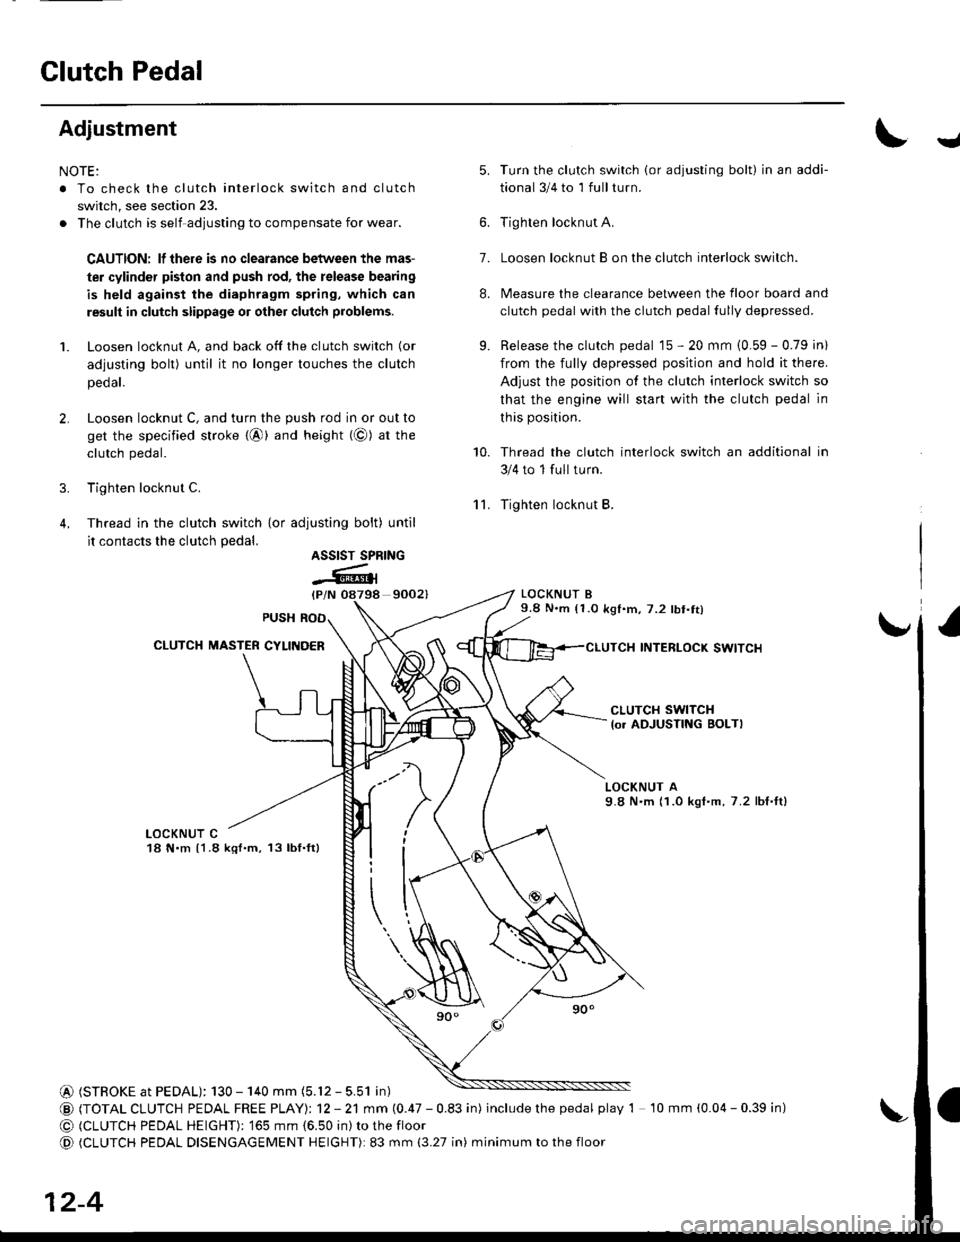 HONDA CIVIC 1997 6.G Workshop Manual Glutch Pedal
Adjustment
NOTE:
. To check the clutch interlock switch and clutch
switch, see section 23.
. The clutch is self-adjusting to compensate for wear.
CAUTION: lf there is no clearance between